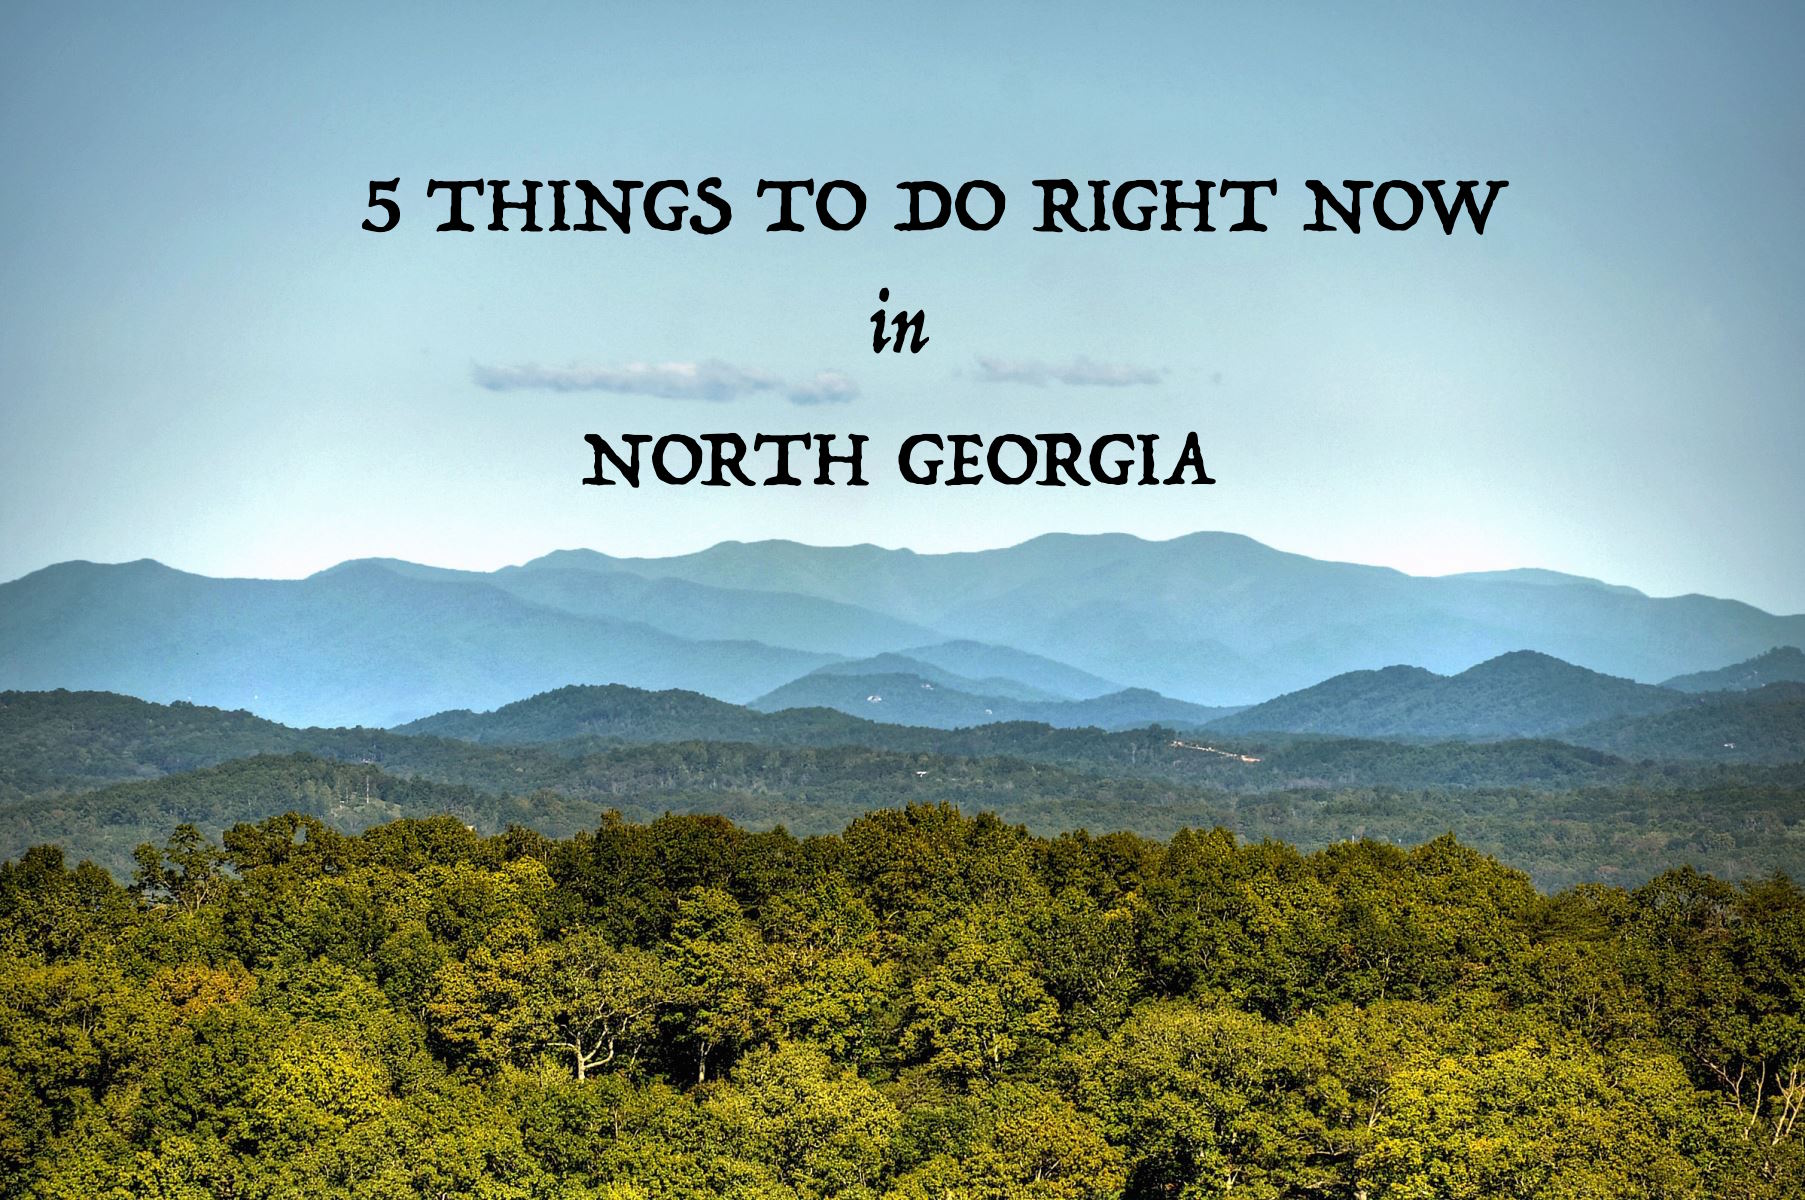 THINGS TO DO IN NORTH GEORGIA